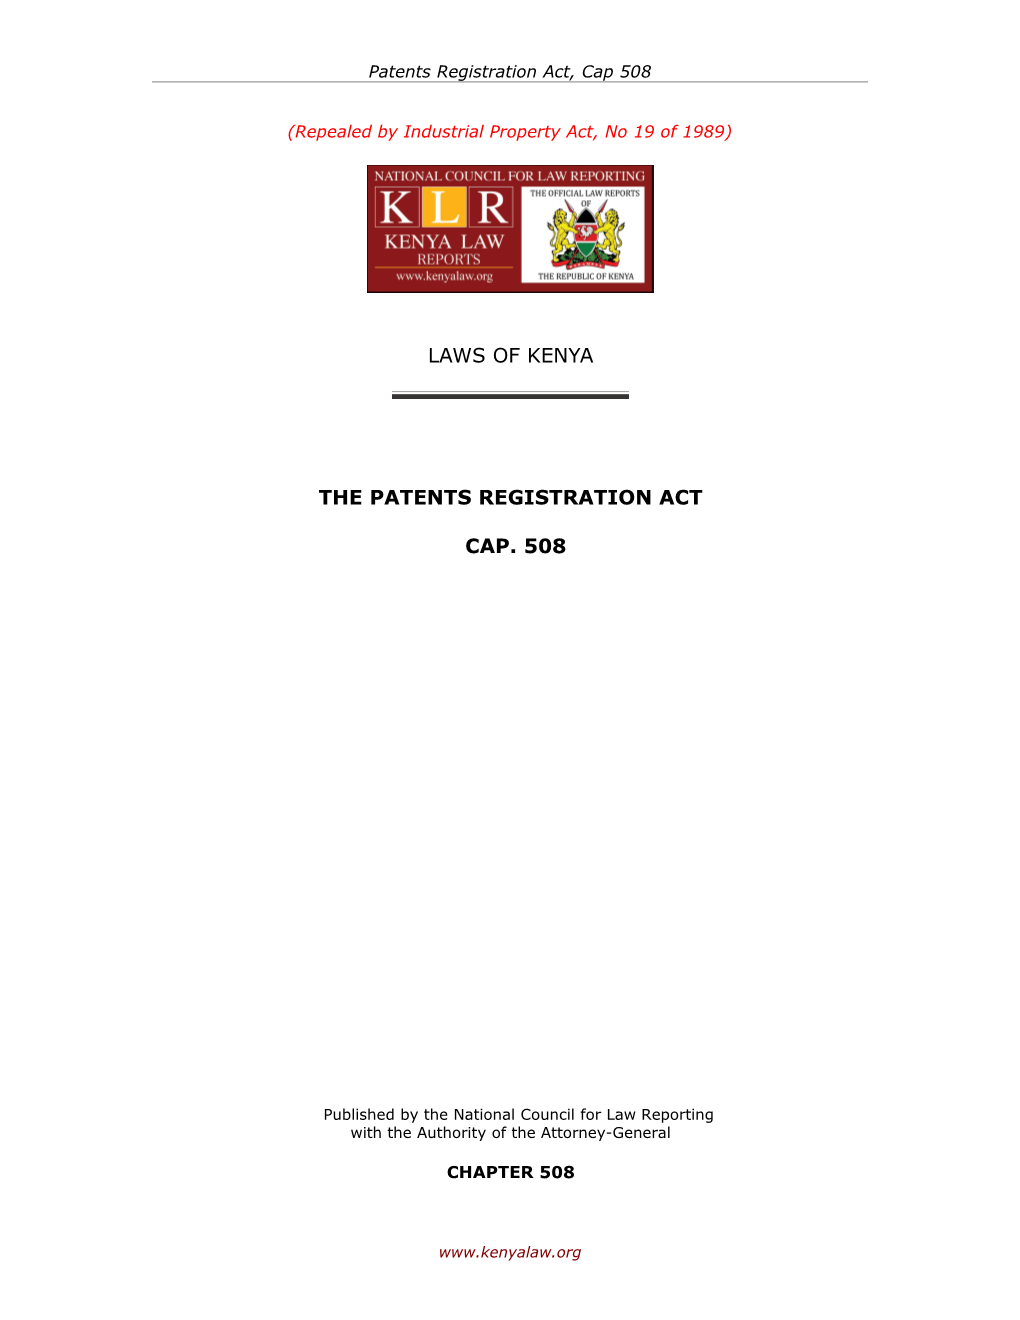 CHAPTER 508 - Patents Registration (Repealed) Act